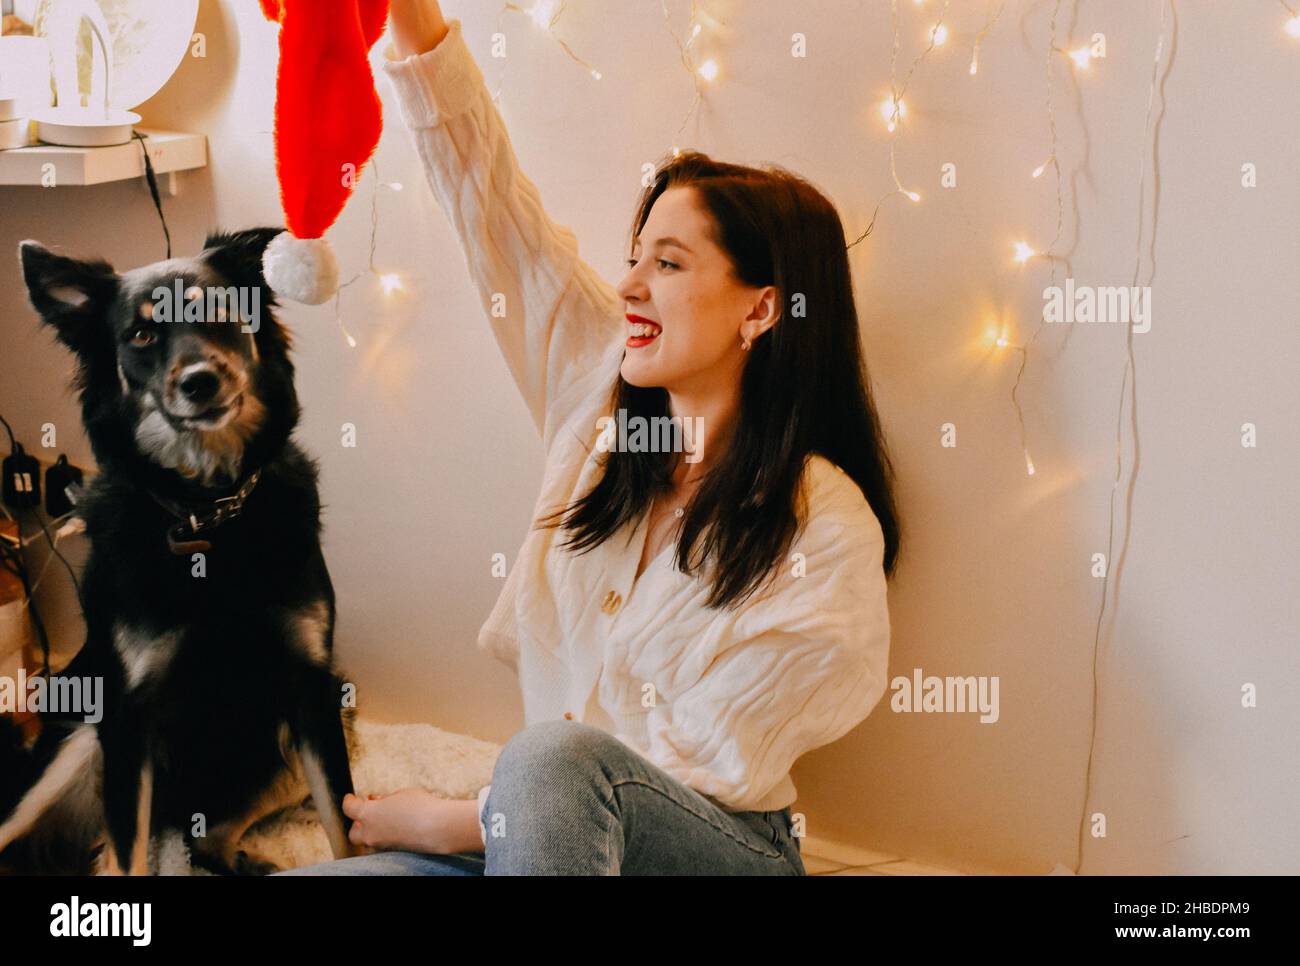 A shot of a Caucasian girl playing with her dog with Santa hat and Christmas lights on the wall Stock Photo